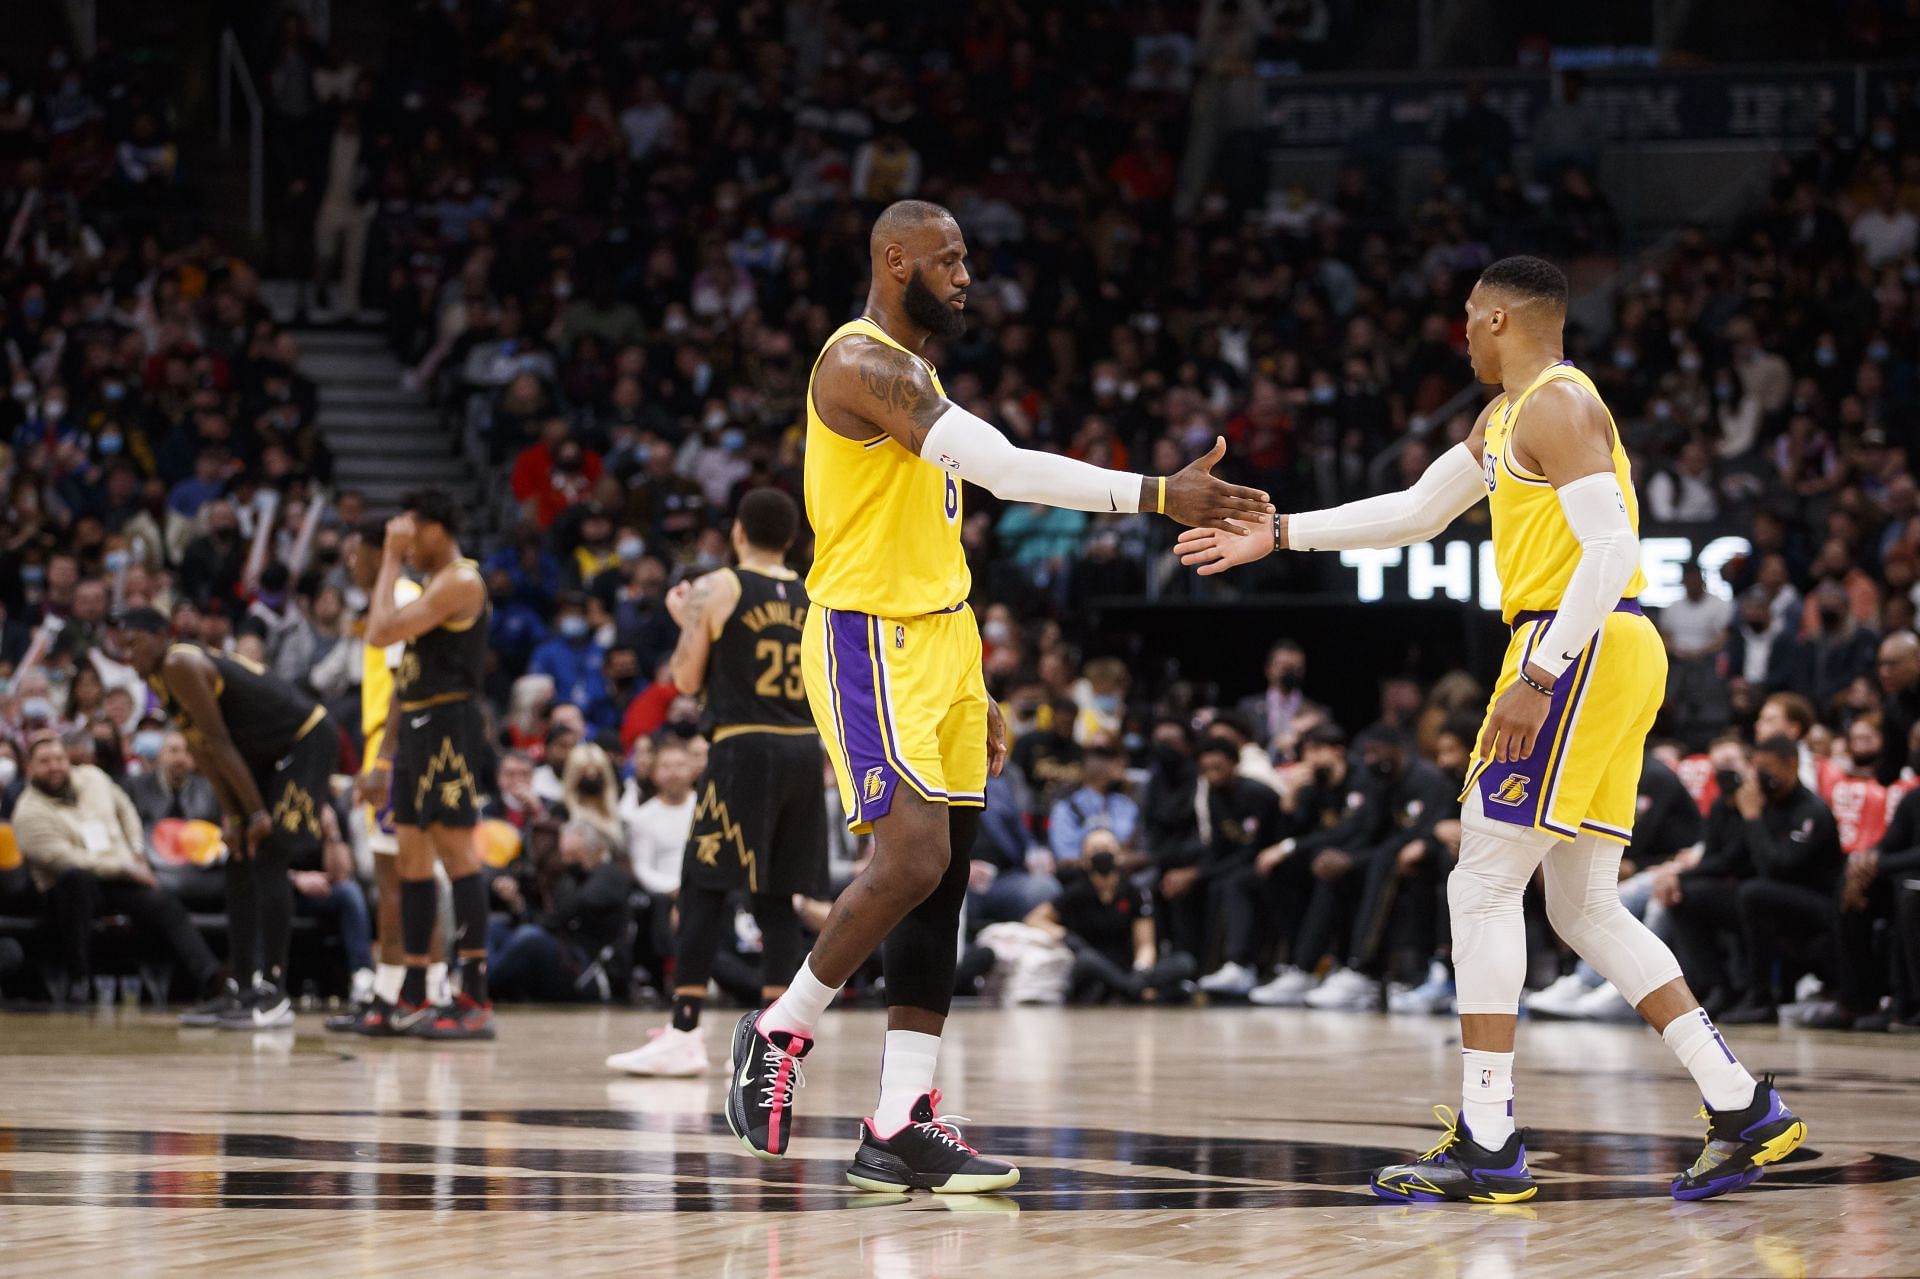 Los Angeles Lakers superstars LeBron James and Russell Westbrook